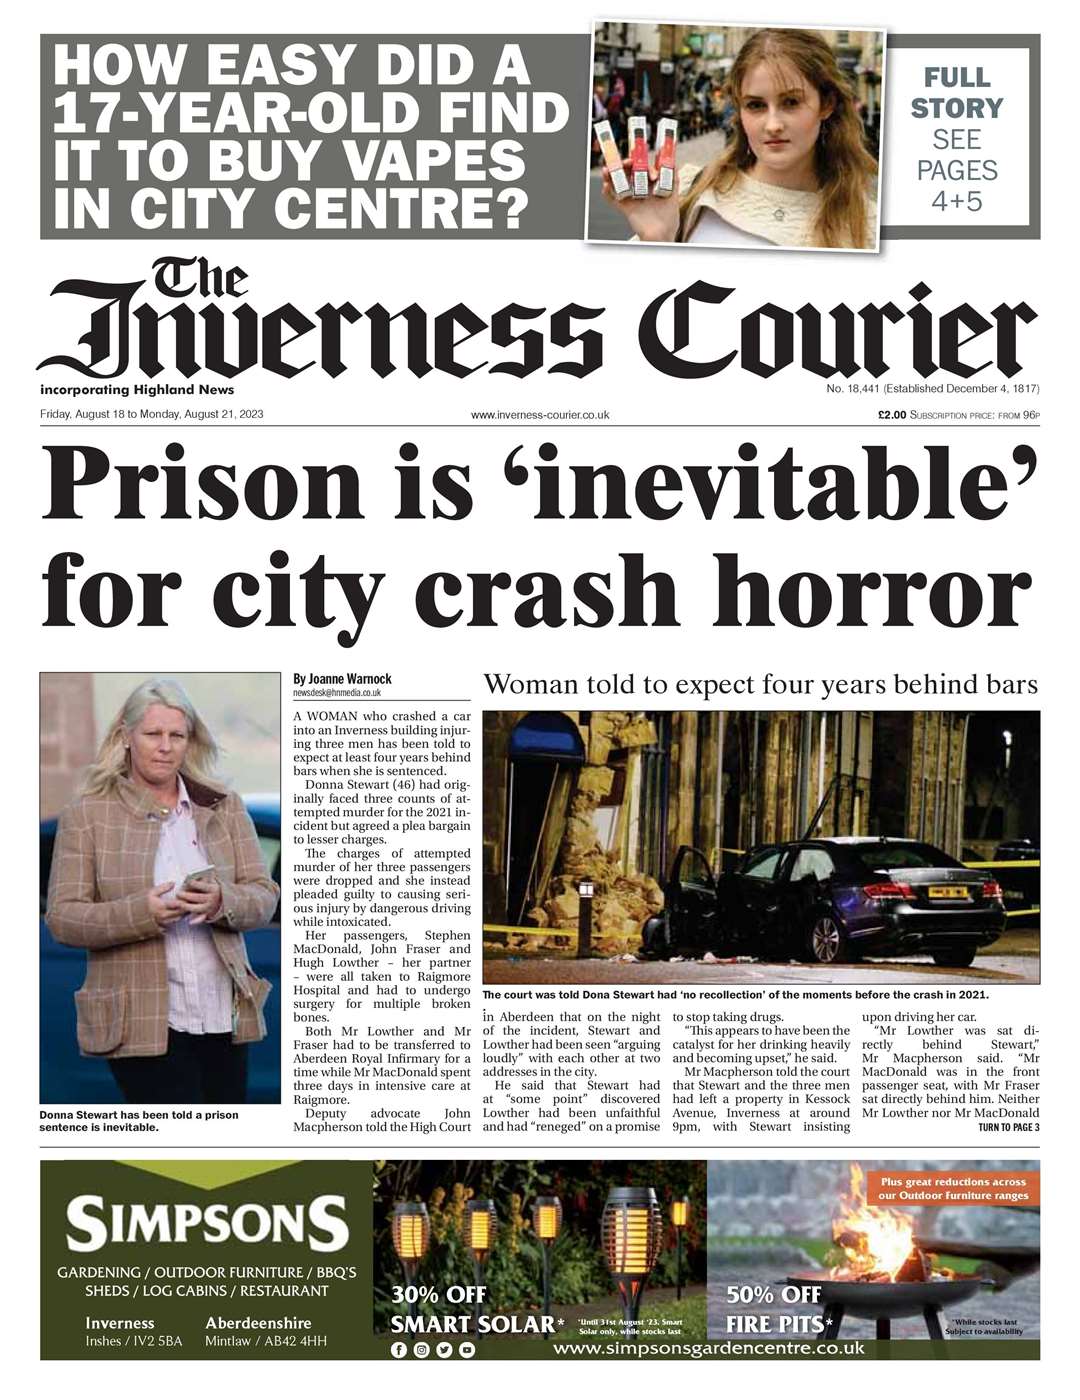 The Inverness Courier, August 18, front page.